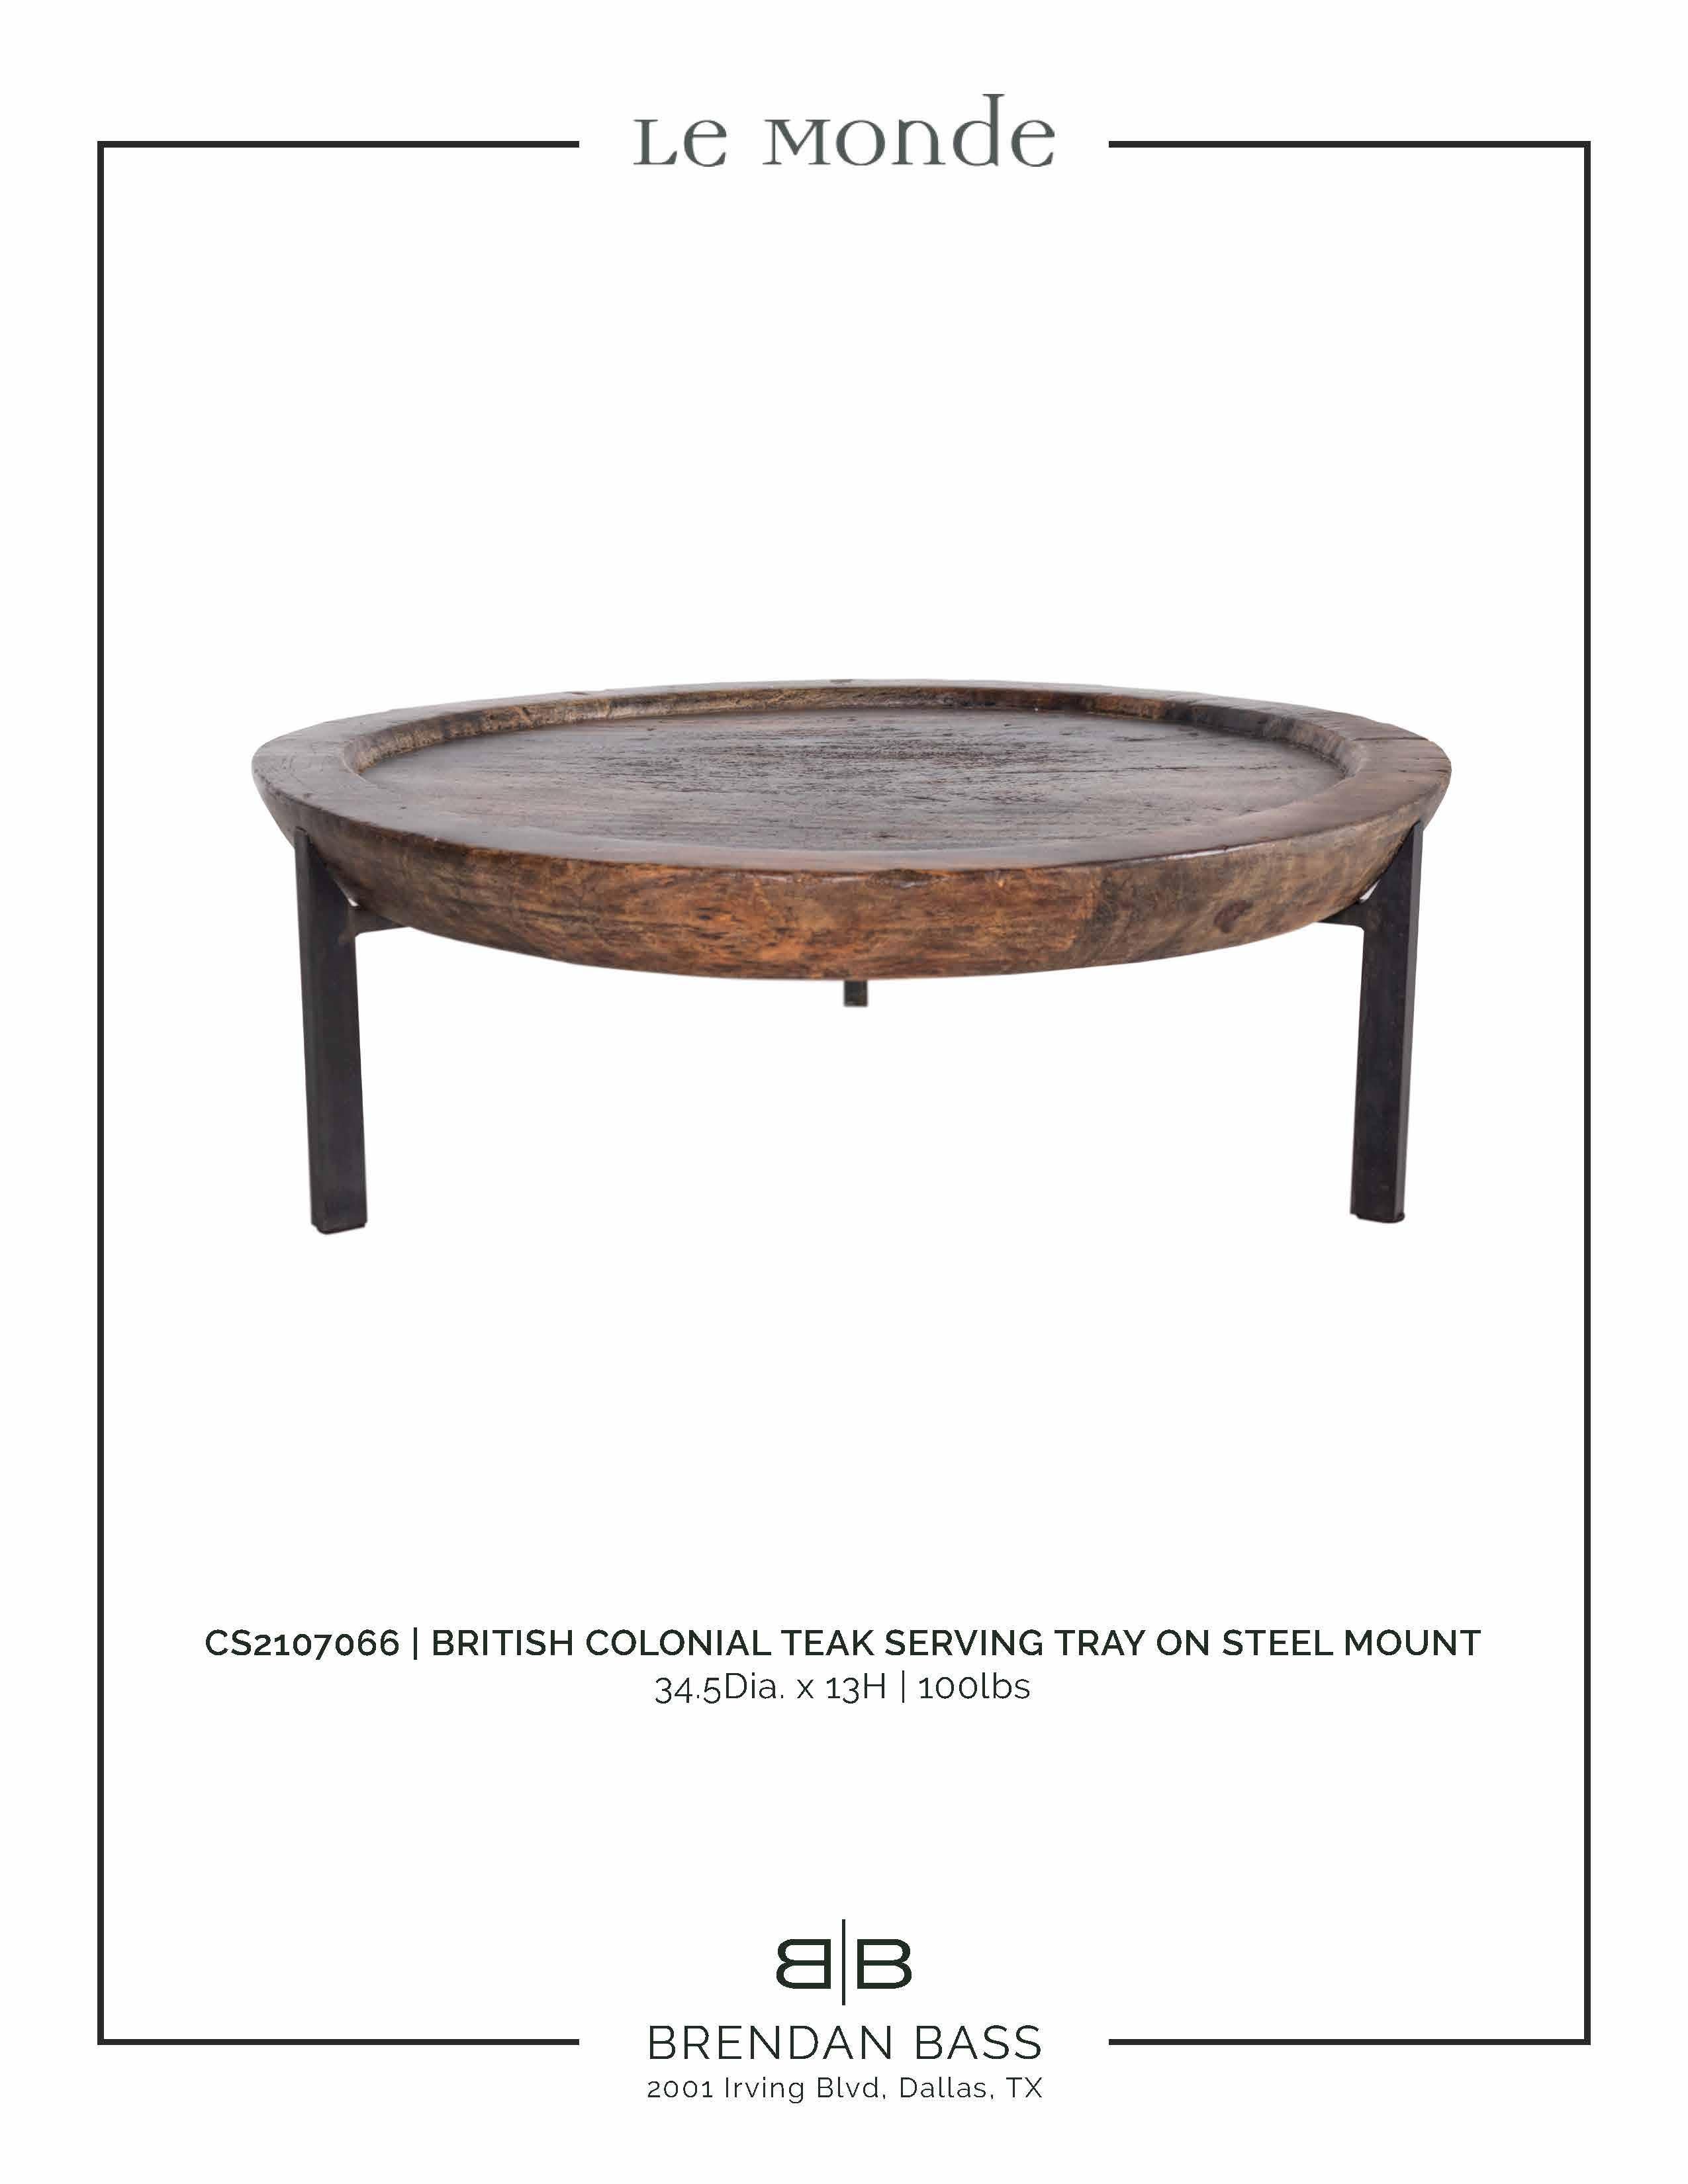 British colonial vintage teak serving tray on steel mount. 

Piece from the Le Monde collection. Exclusive to Brendan Bass.
   